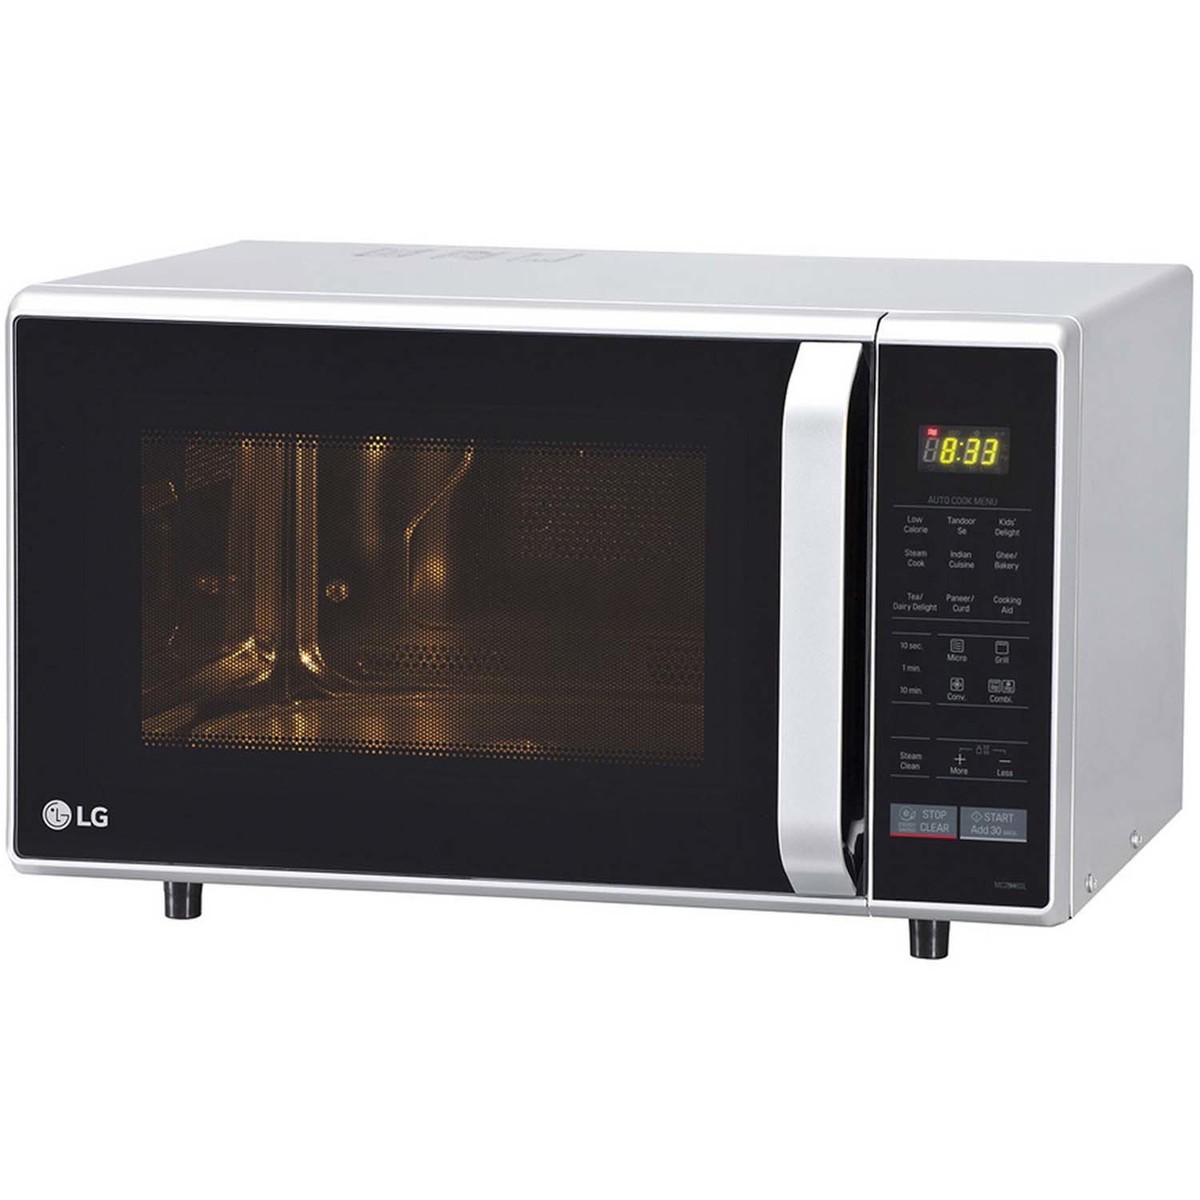 LG Microwave Oven Grill + Convection MC2846SL 28Ltr Online at Best